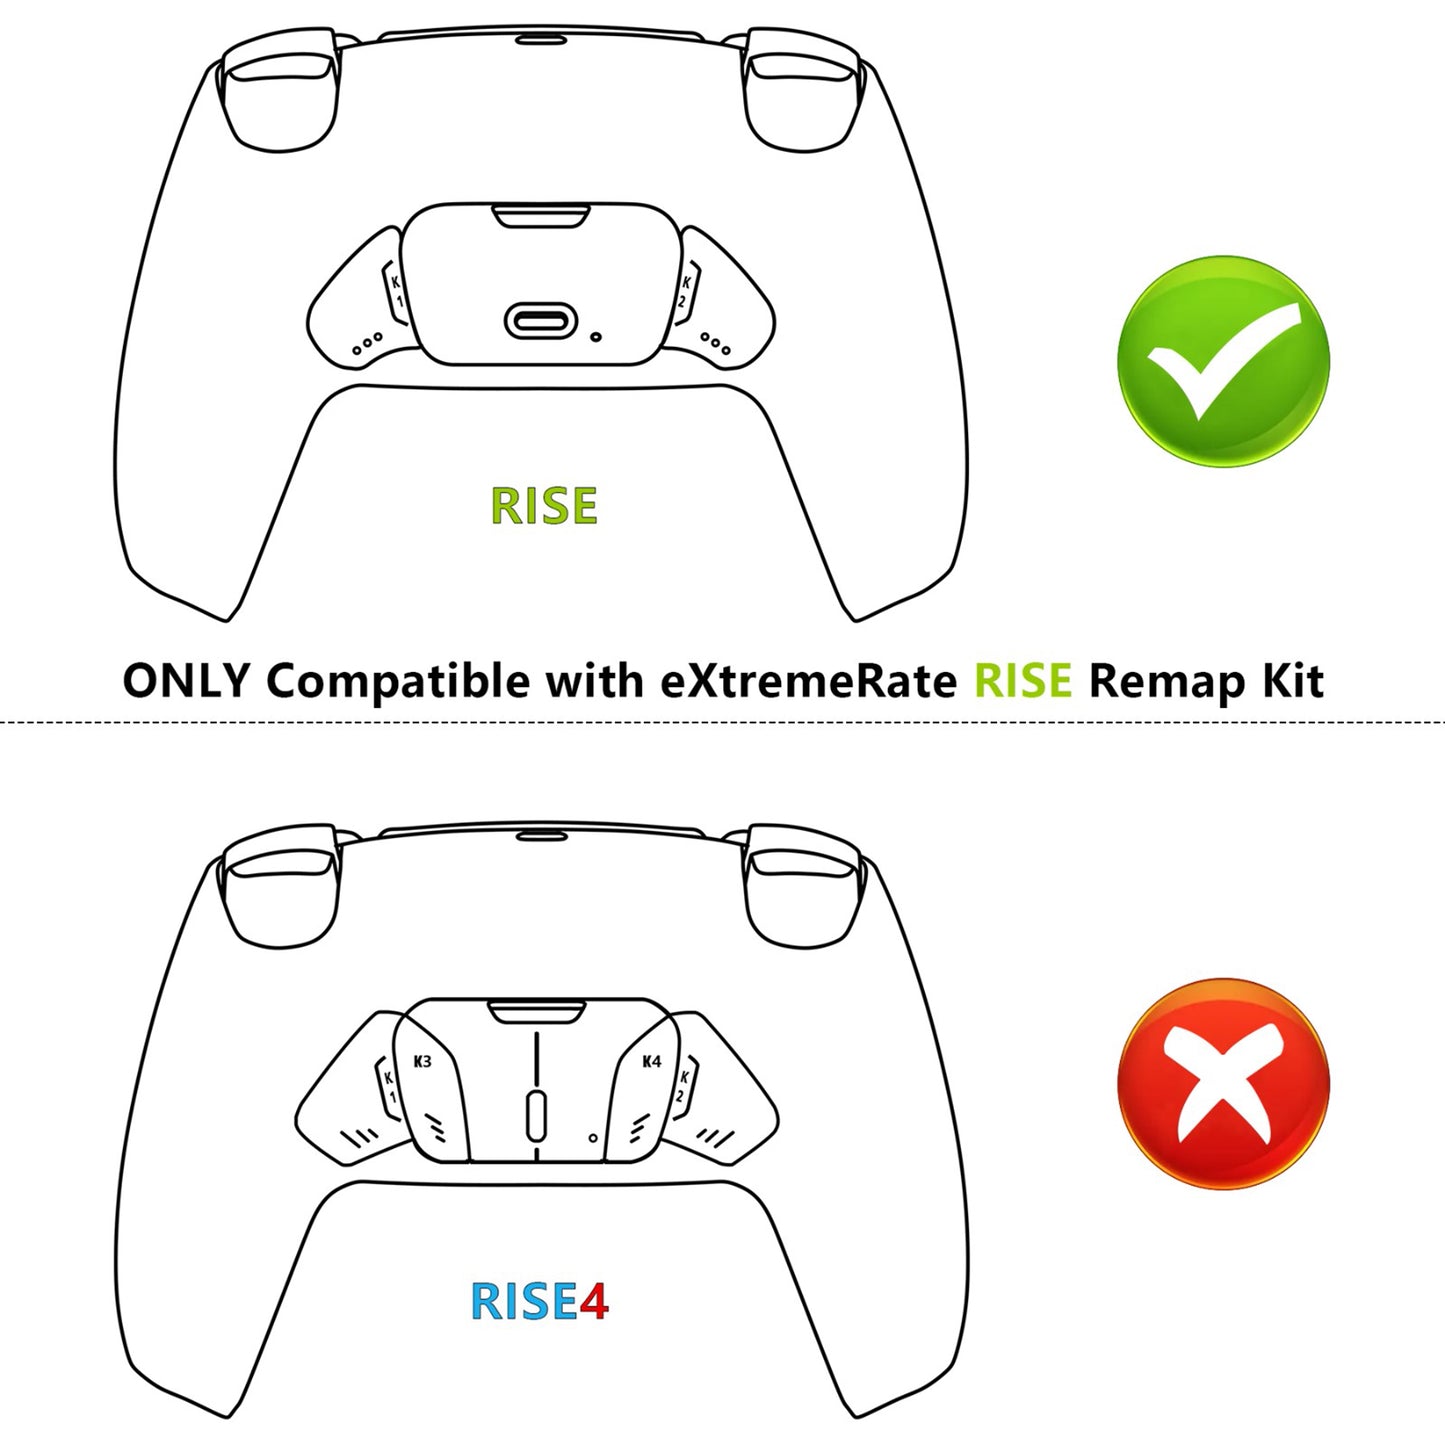 eXtremeRate Replacement Redesigned K1 K2 Back Buttons for eXtremerate RISE Remap Kit, Compatible with PS5 Controller - Chameleon Green Purple eXtremeRate